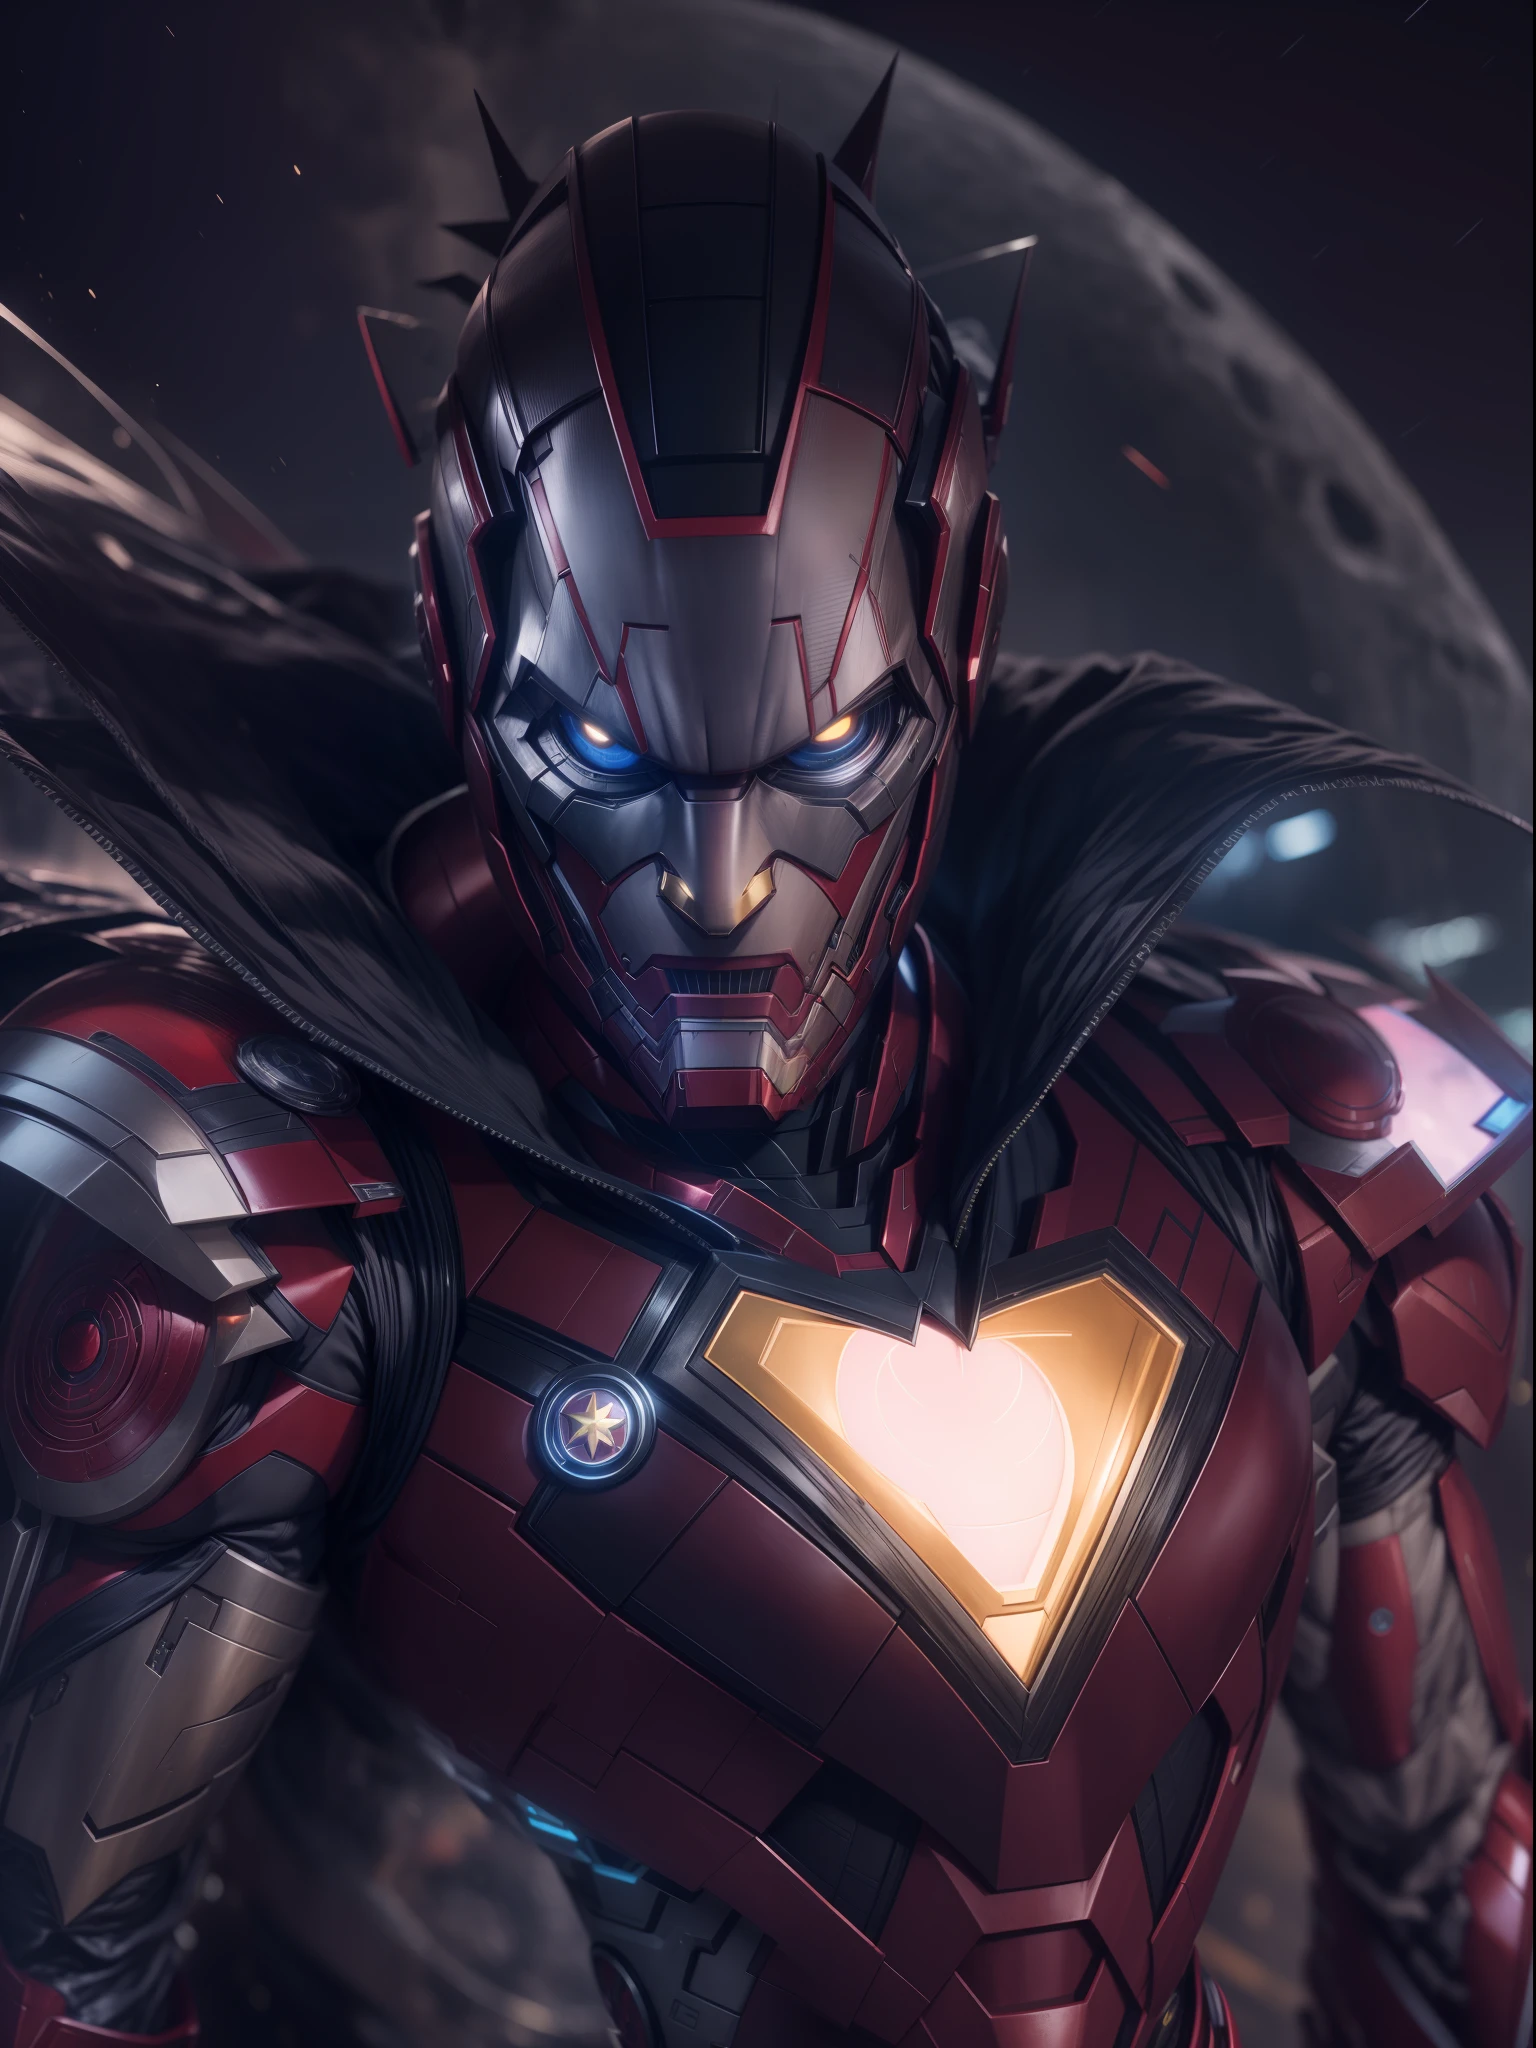 Close a powerful threat, The imposing appearance of an joker iron man fusion, menacing stare, ricamente detalhado, Hiper realista, 3D-rendering, obra-prima, NVIDIA, RTX, ray-traced, Bokeh, Night sky with a huge and beautiful full moon, estrelas brilhando, 8k,